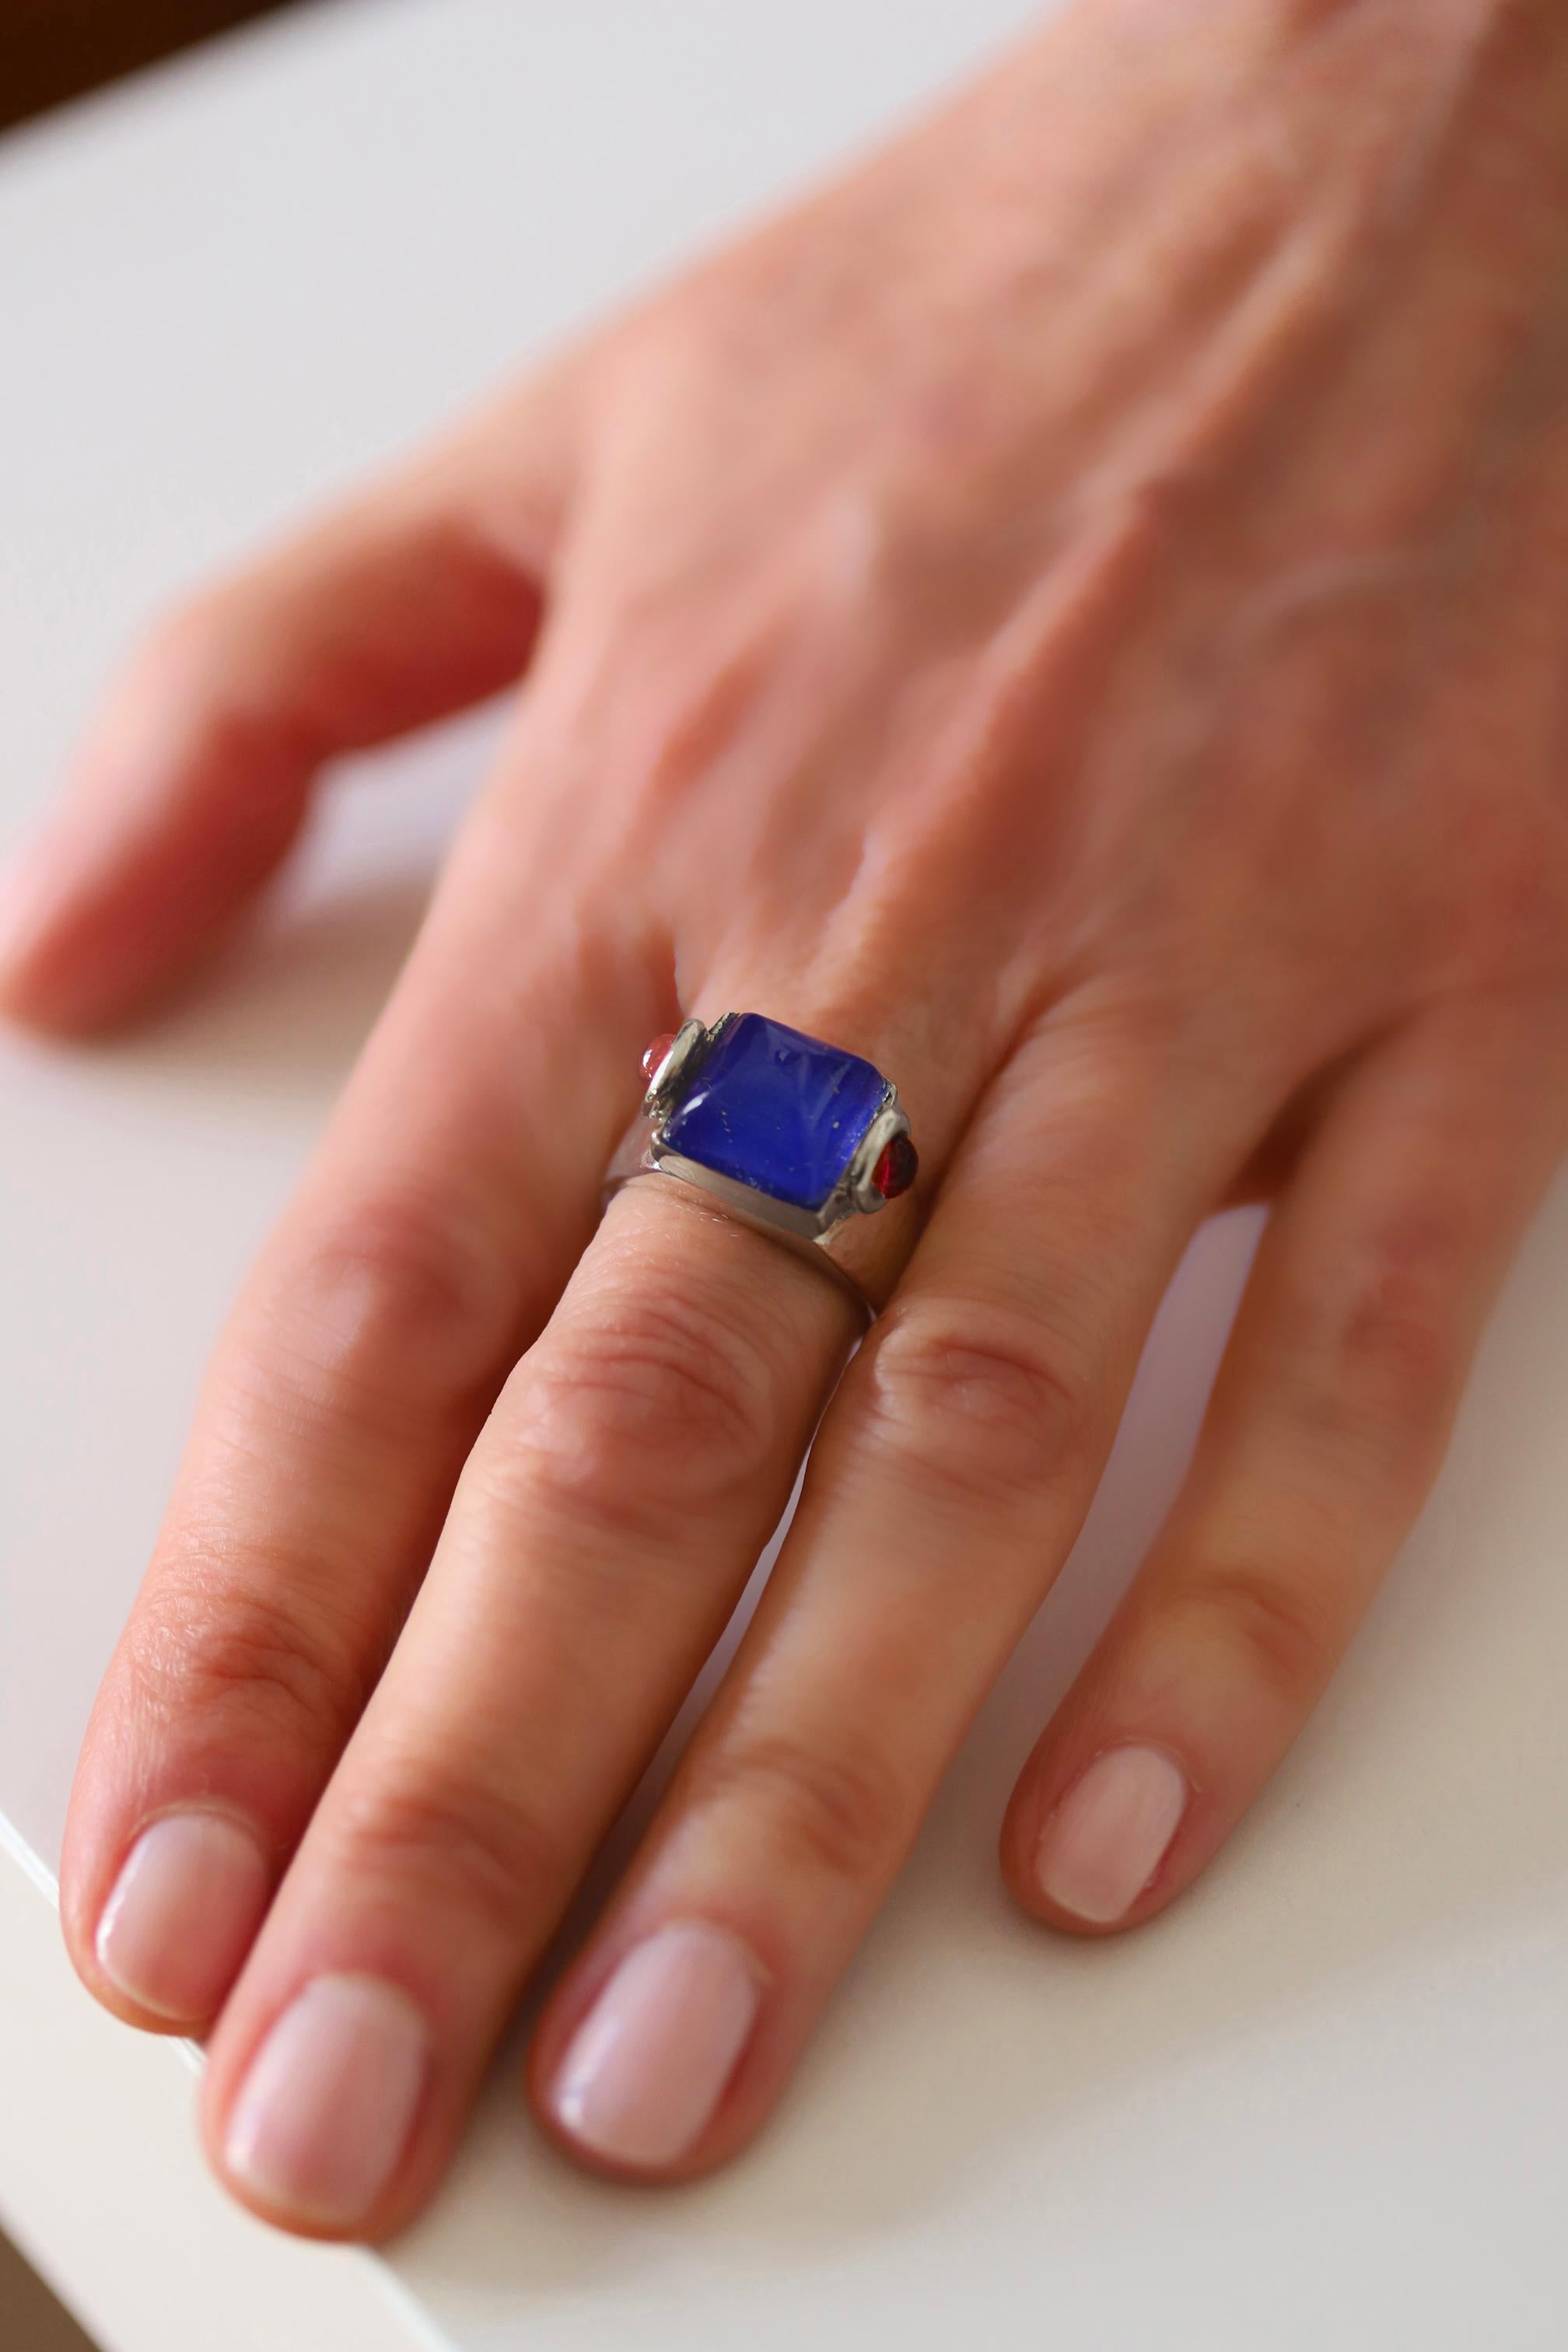 Rossella Ugolini's Castle of Italy design collection, meticulously handcrafted in Platinum featuring a striking lapis lazuli and rock crystal sugarloaf cabochon accented by two cabochon Red Rubies . This exceptional craftsmanship, originating from